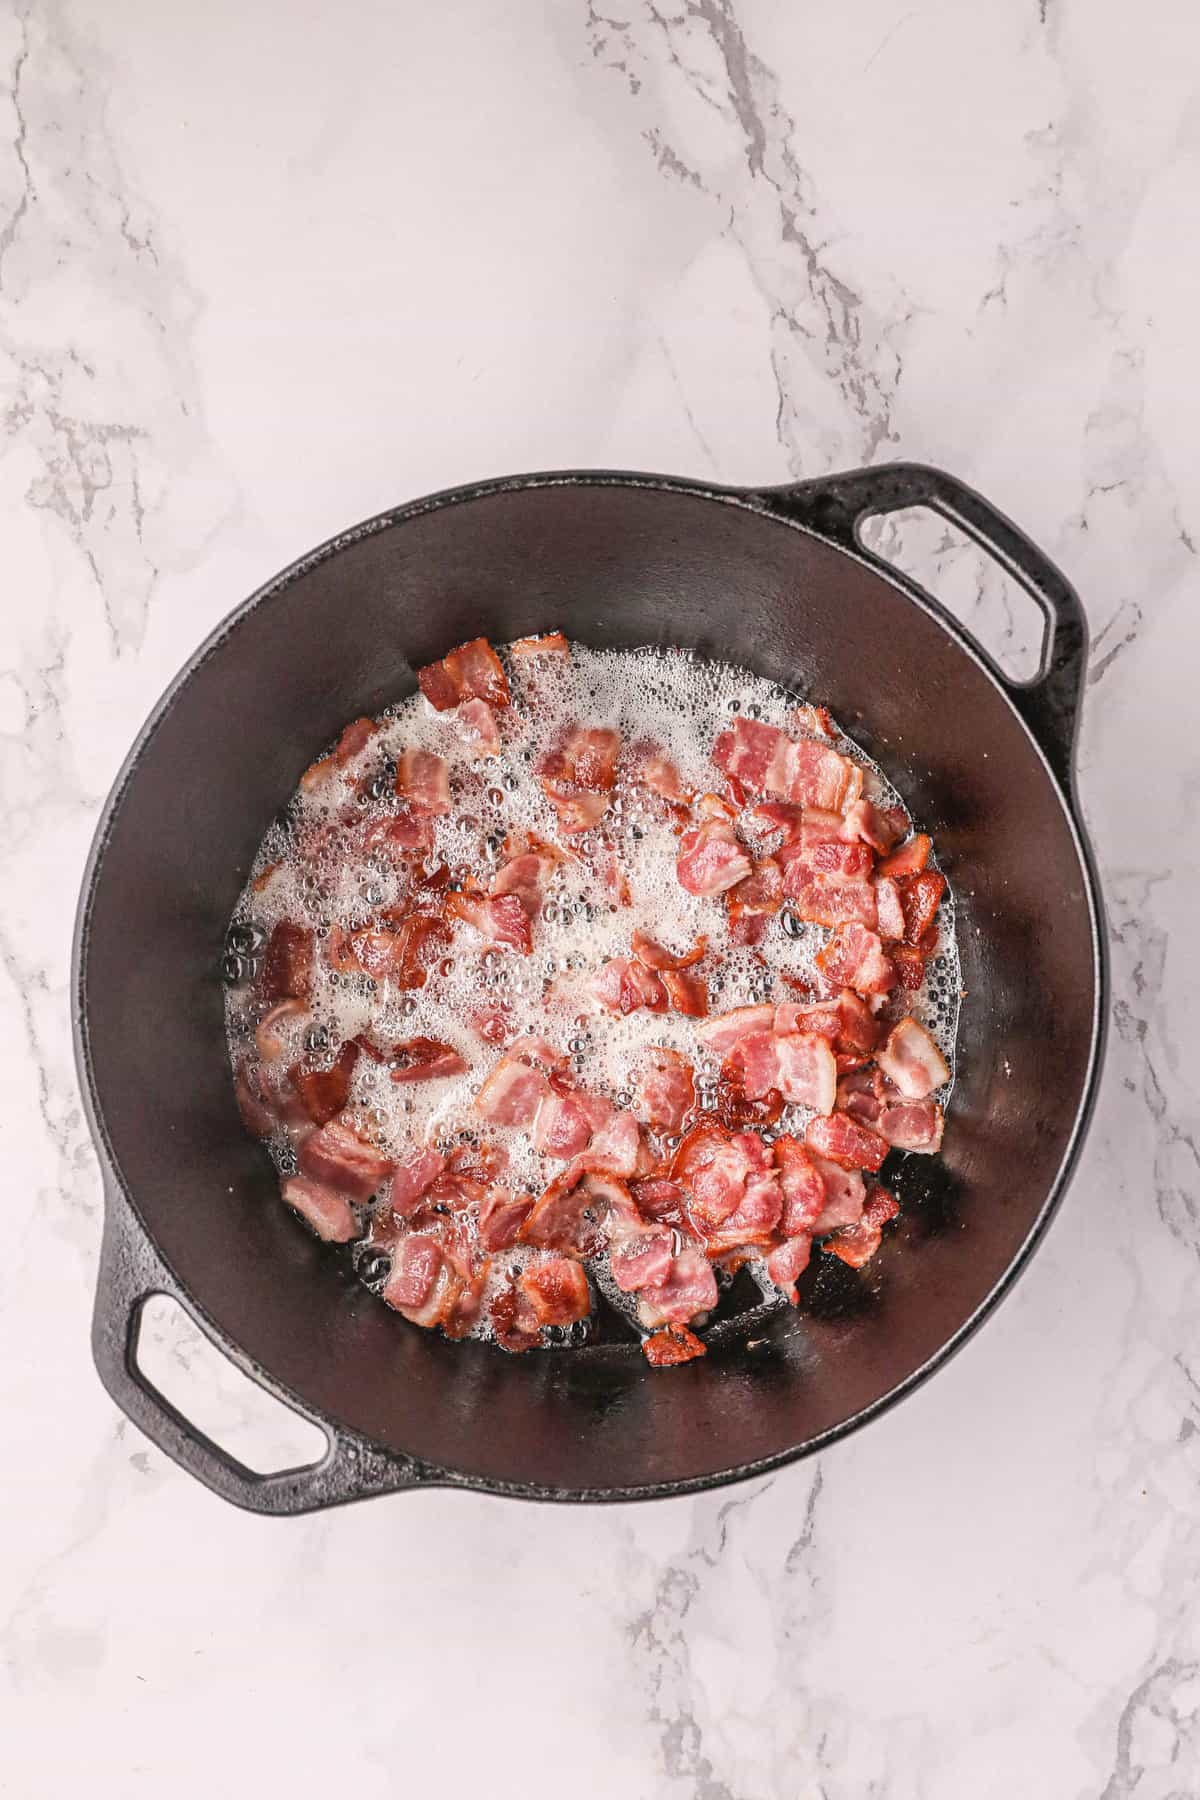 Cooking bacon in dutch oven until done for Traeger Baked Beans